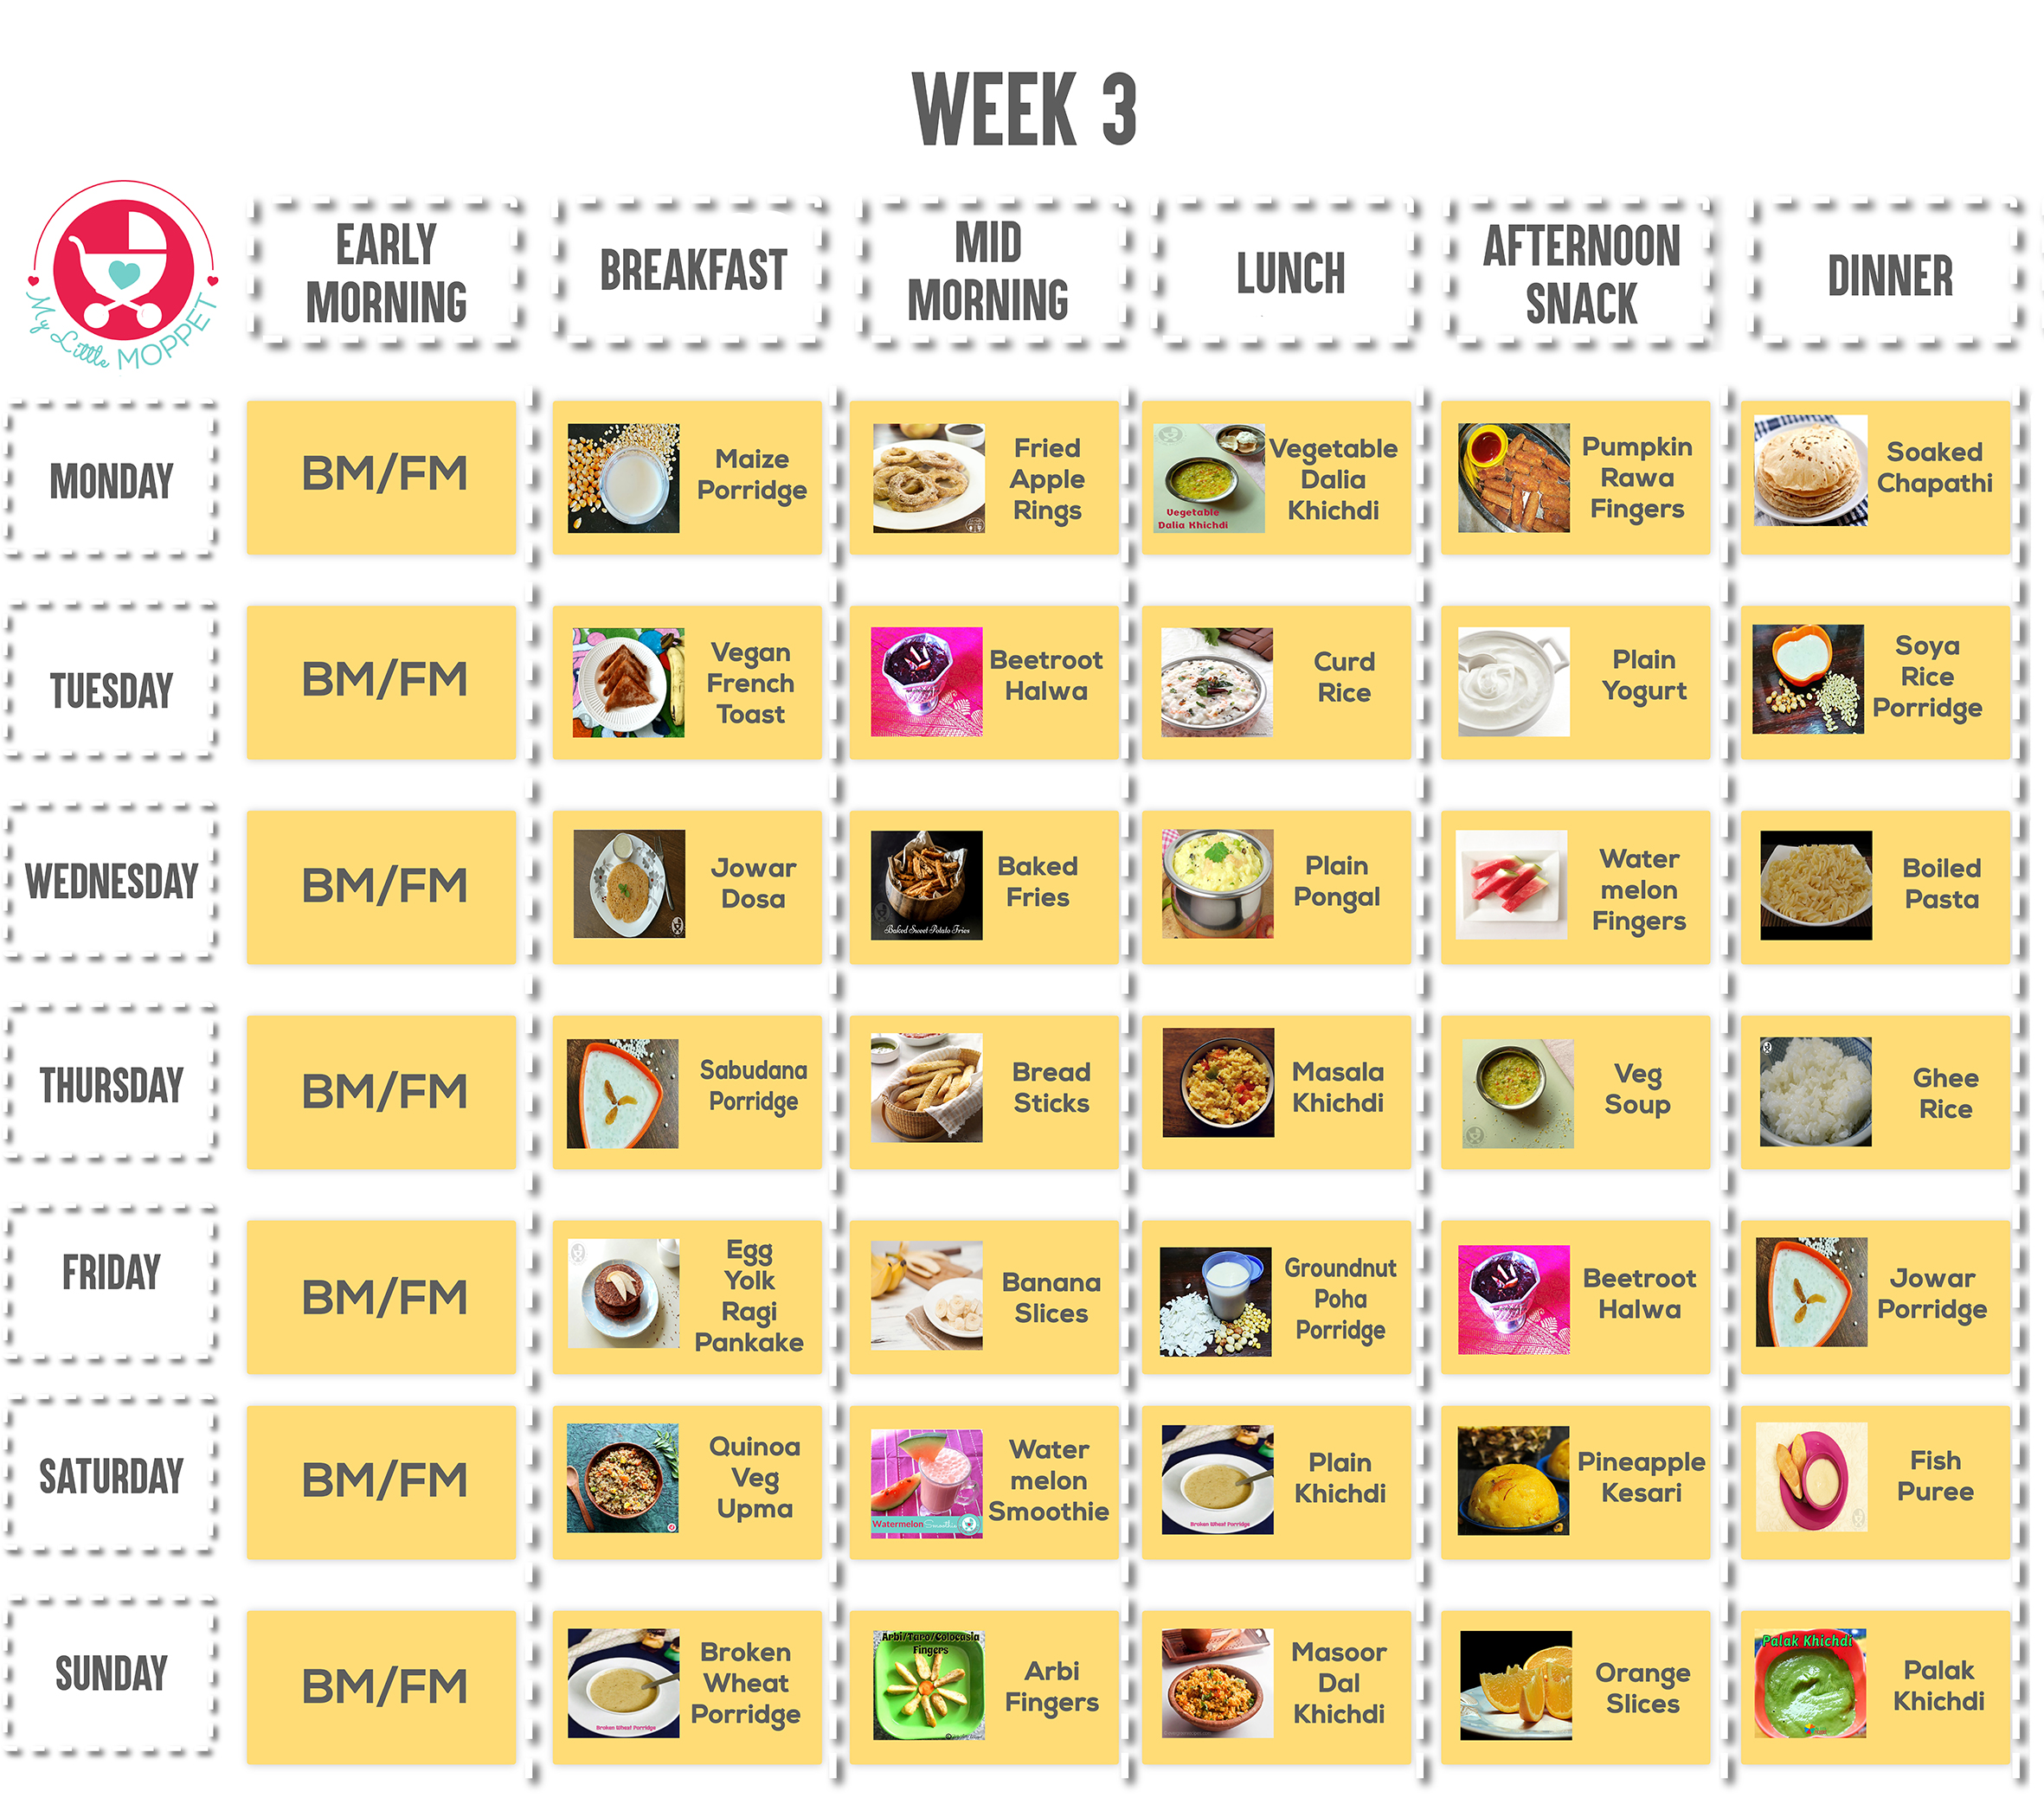 This is the time many Moms complain about a decrease in baby's appetite. Let's fix that by changing up your baby's diet with our 10 Months Baby Food Chart!